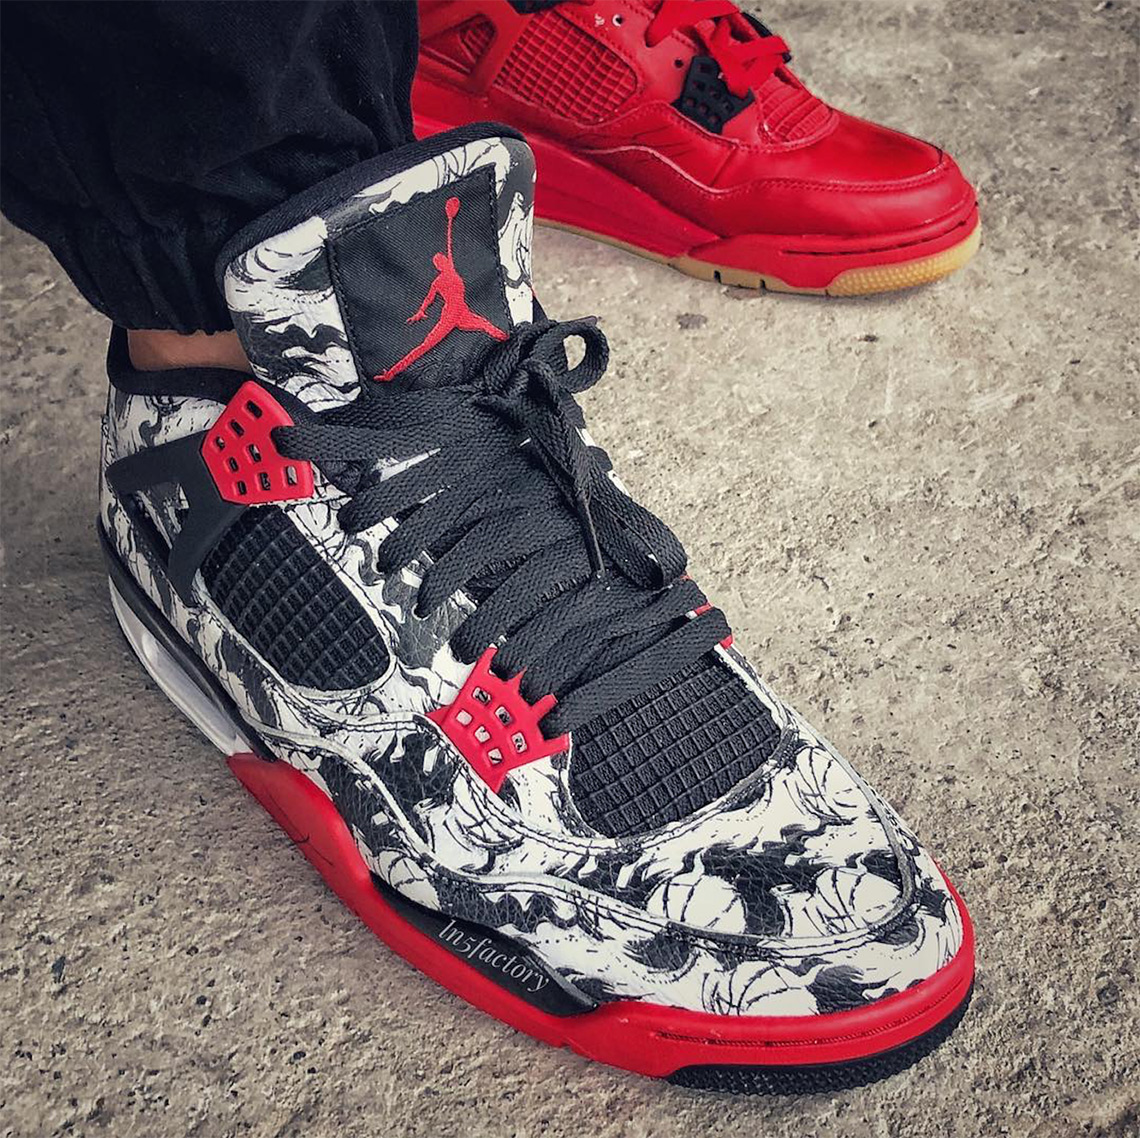 List 91+ Pictures Pictures Of The New Air Jordans Stunning